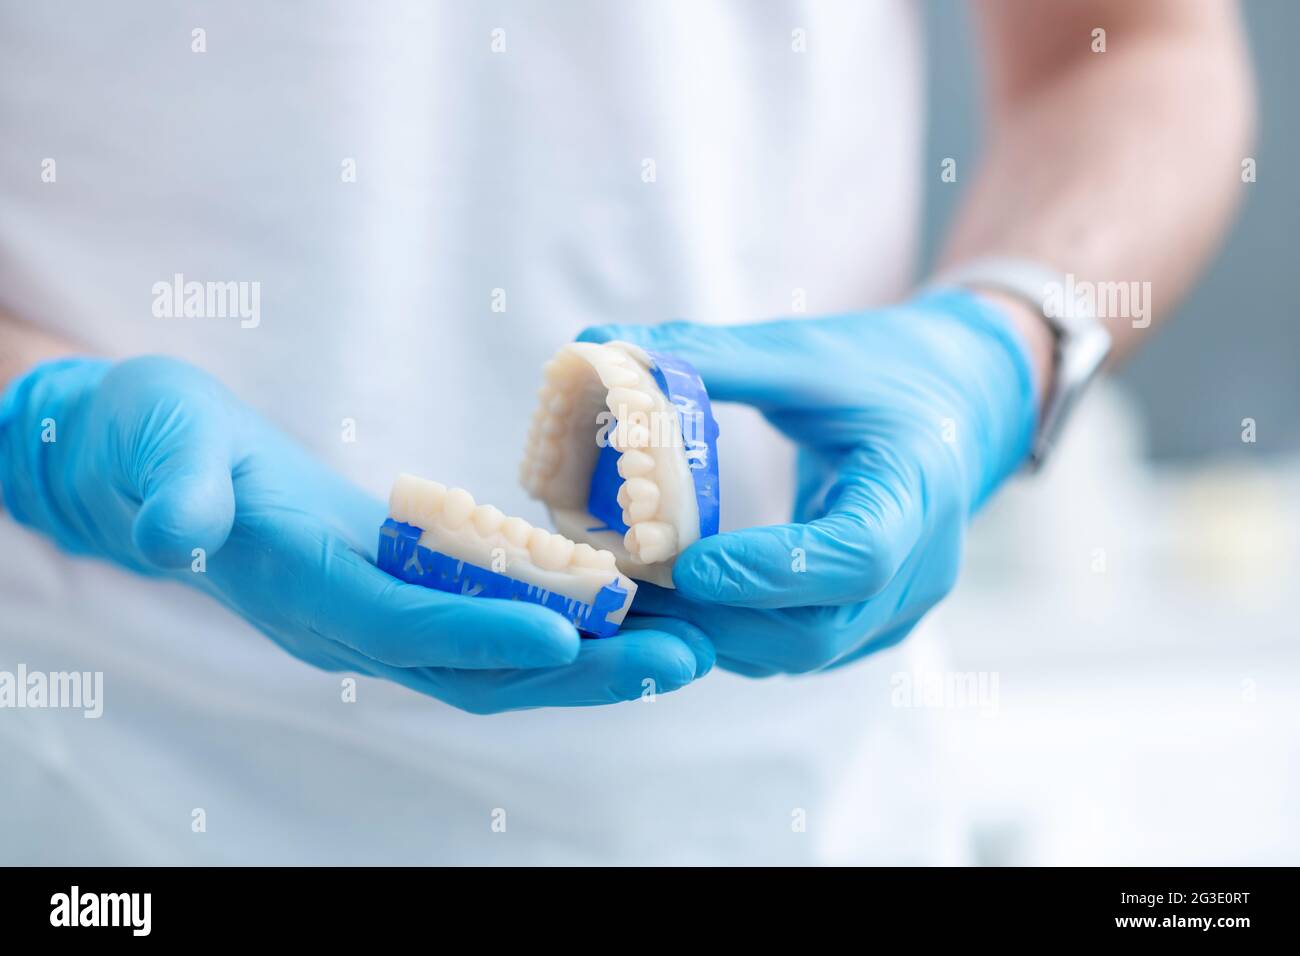 Close up pictire of doctors hands with a denture Stock Photo